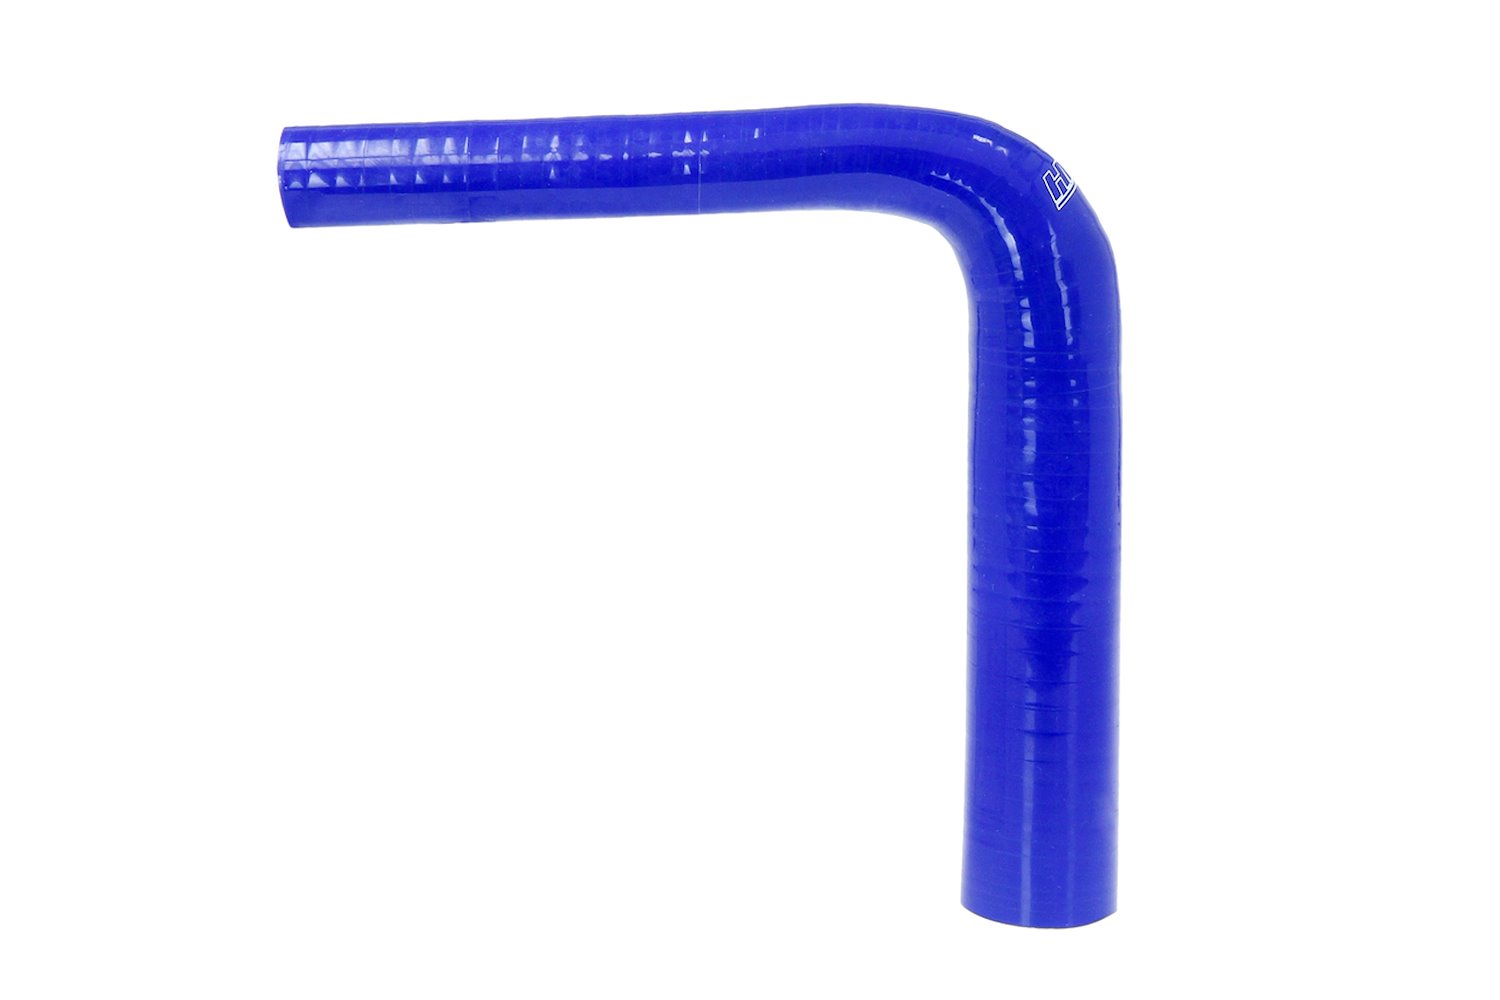 HTSER90-150-175-BLUE Silicone 90-Degree Elbow Hose, High-Temp 4-Ply Reinforced, 1-1/2 in. - 1-3/4 in. ID, Blue